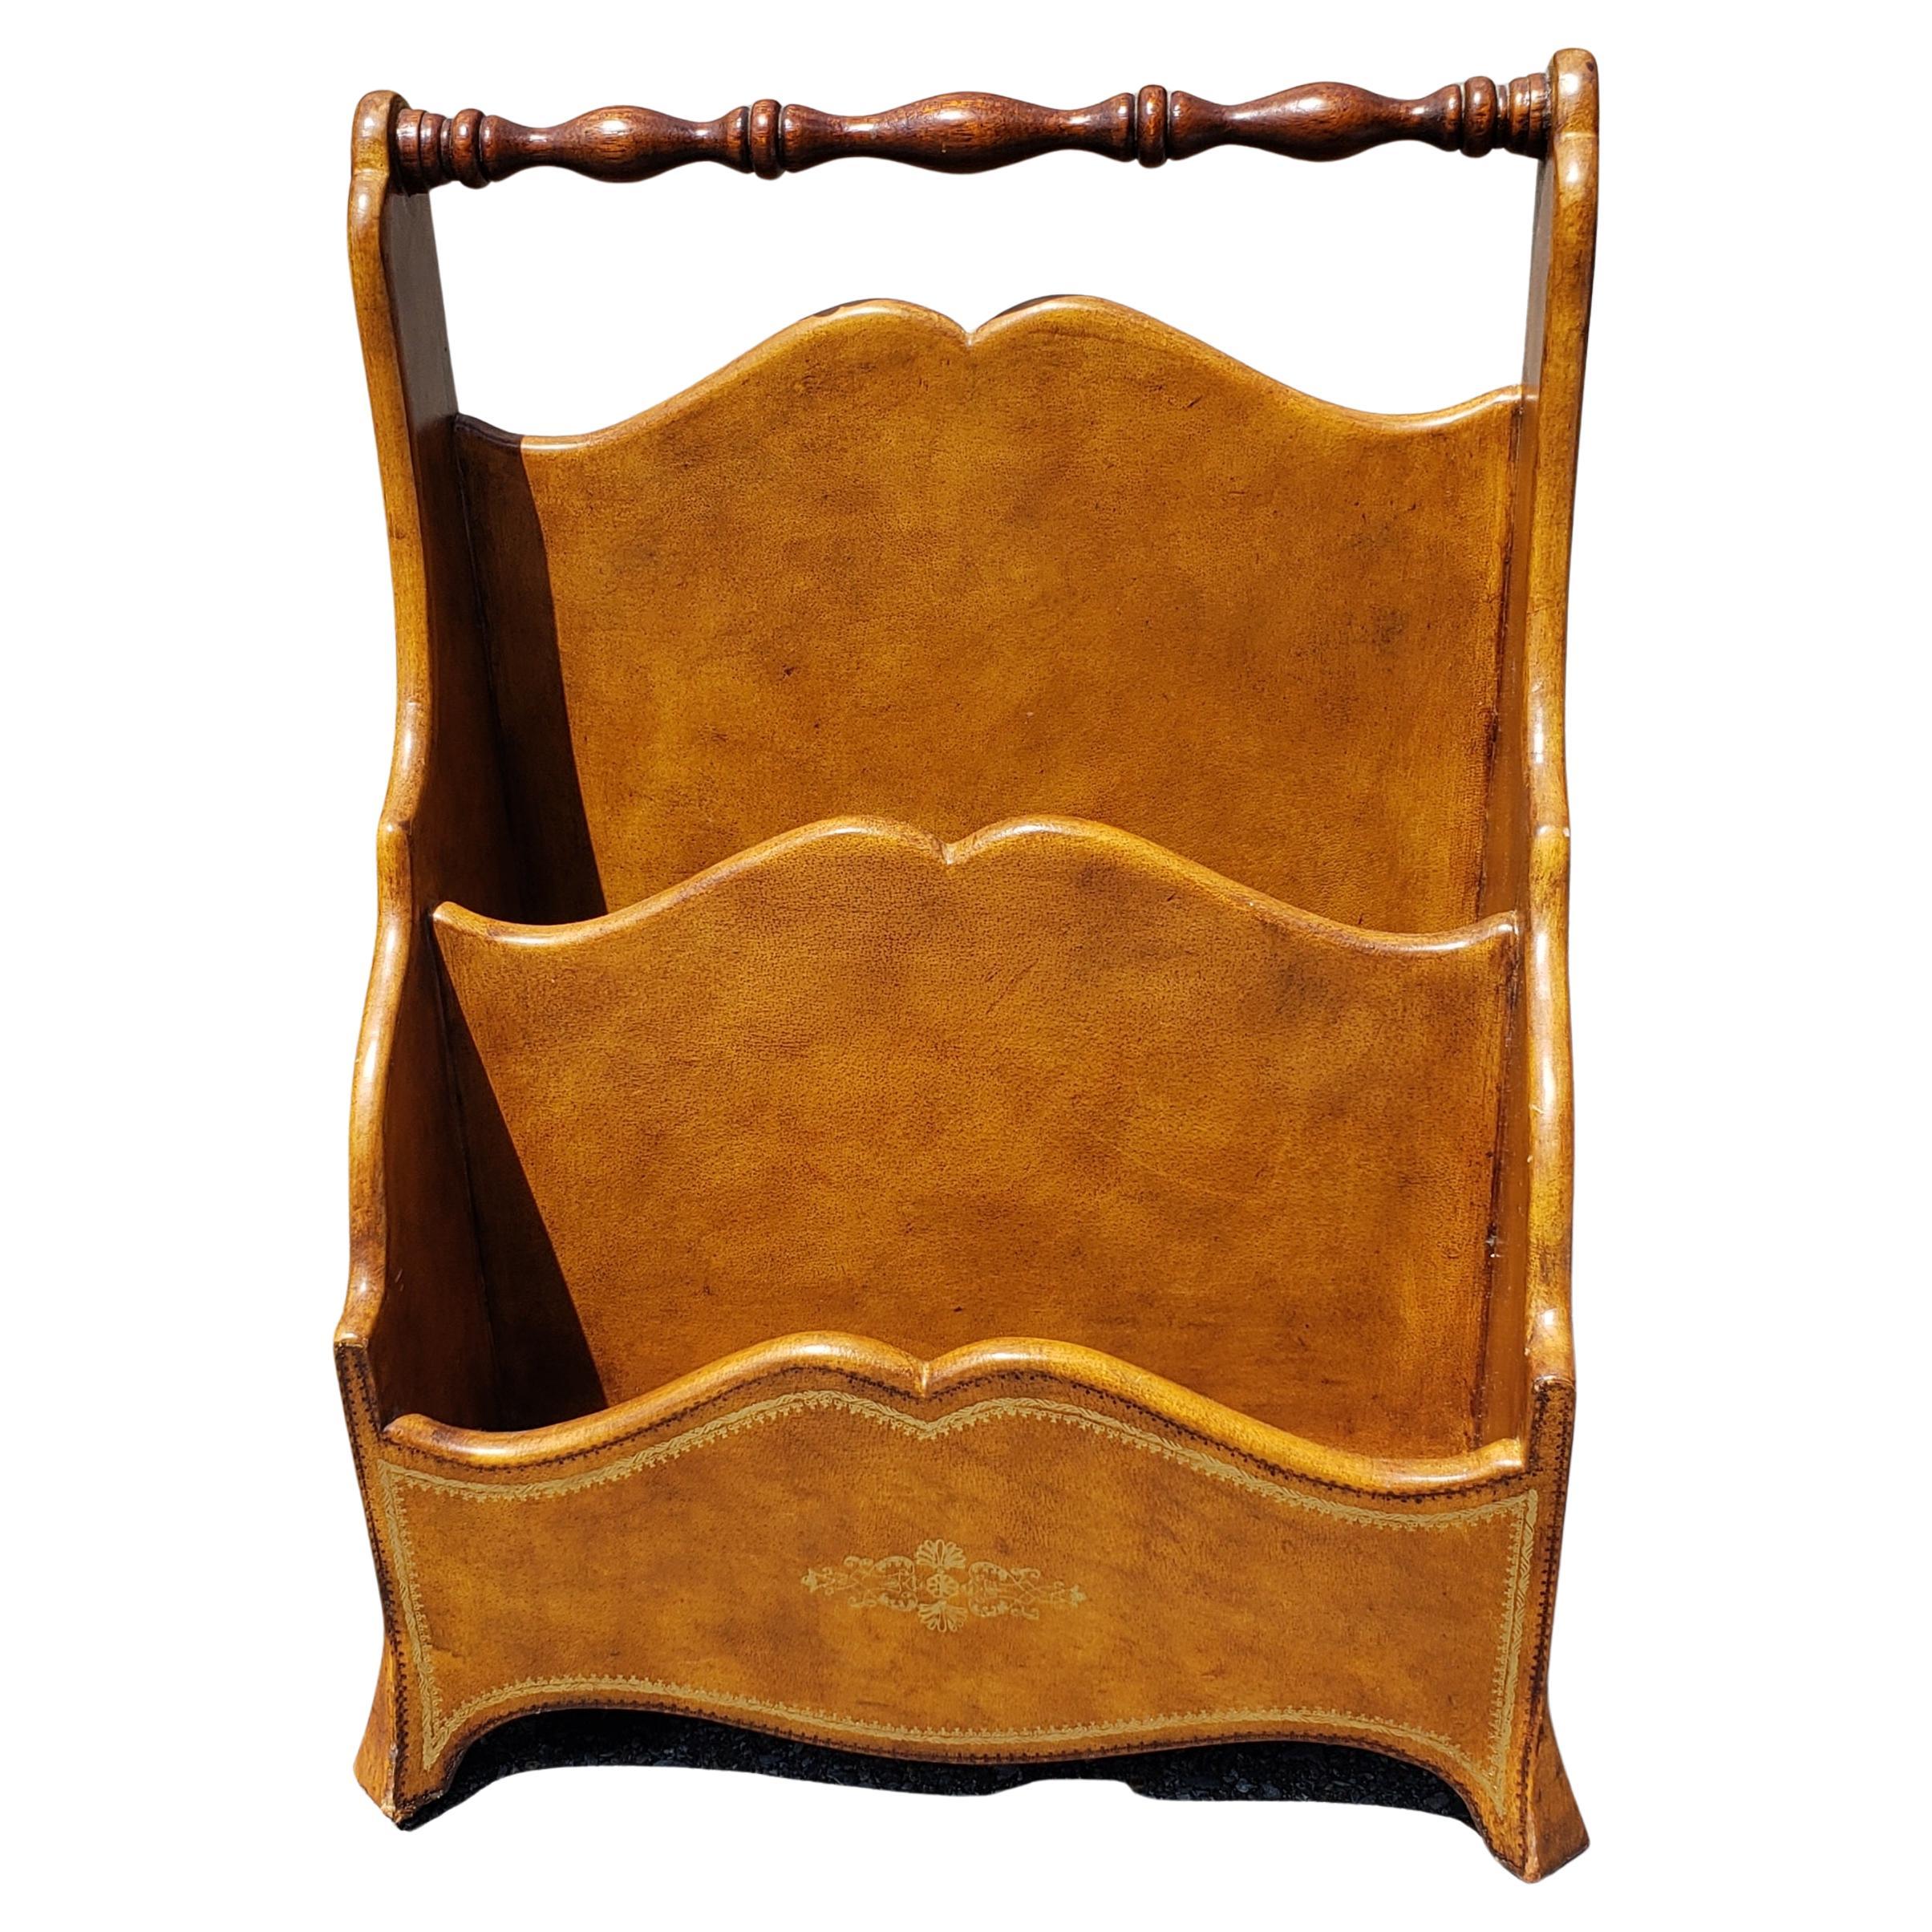 Maitland-Smith Neoclassical style tooled brown leather upholstered magazine rack or Stand. Use it for letters as well.
Very good vintage condition. Measures 15.5